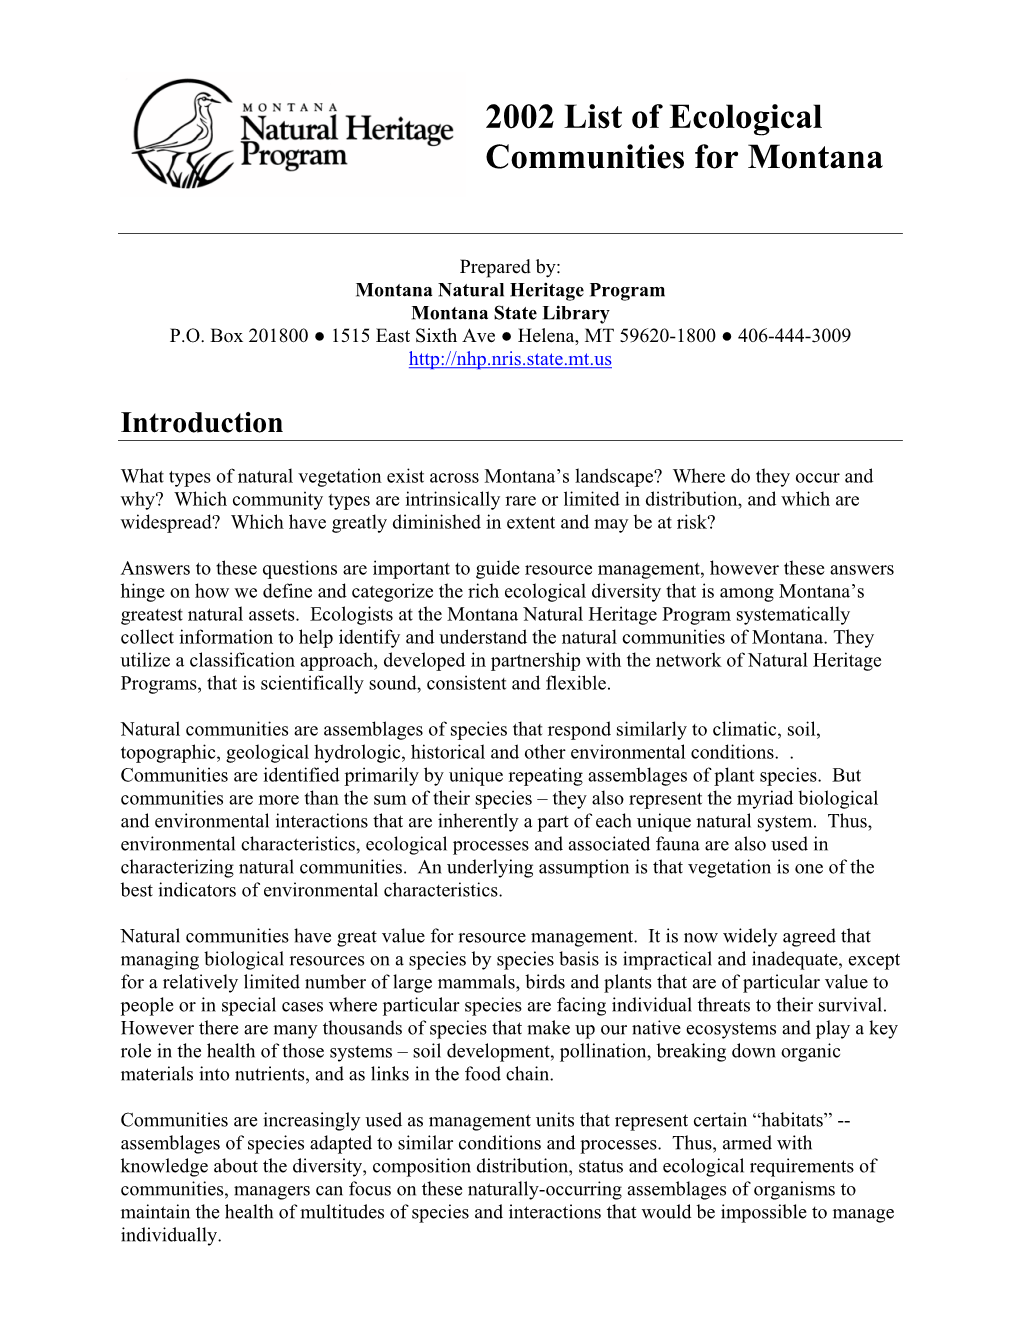 2002 List of Ecological Communities for Montana